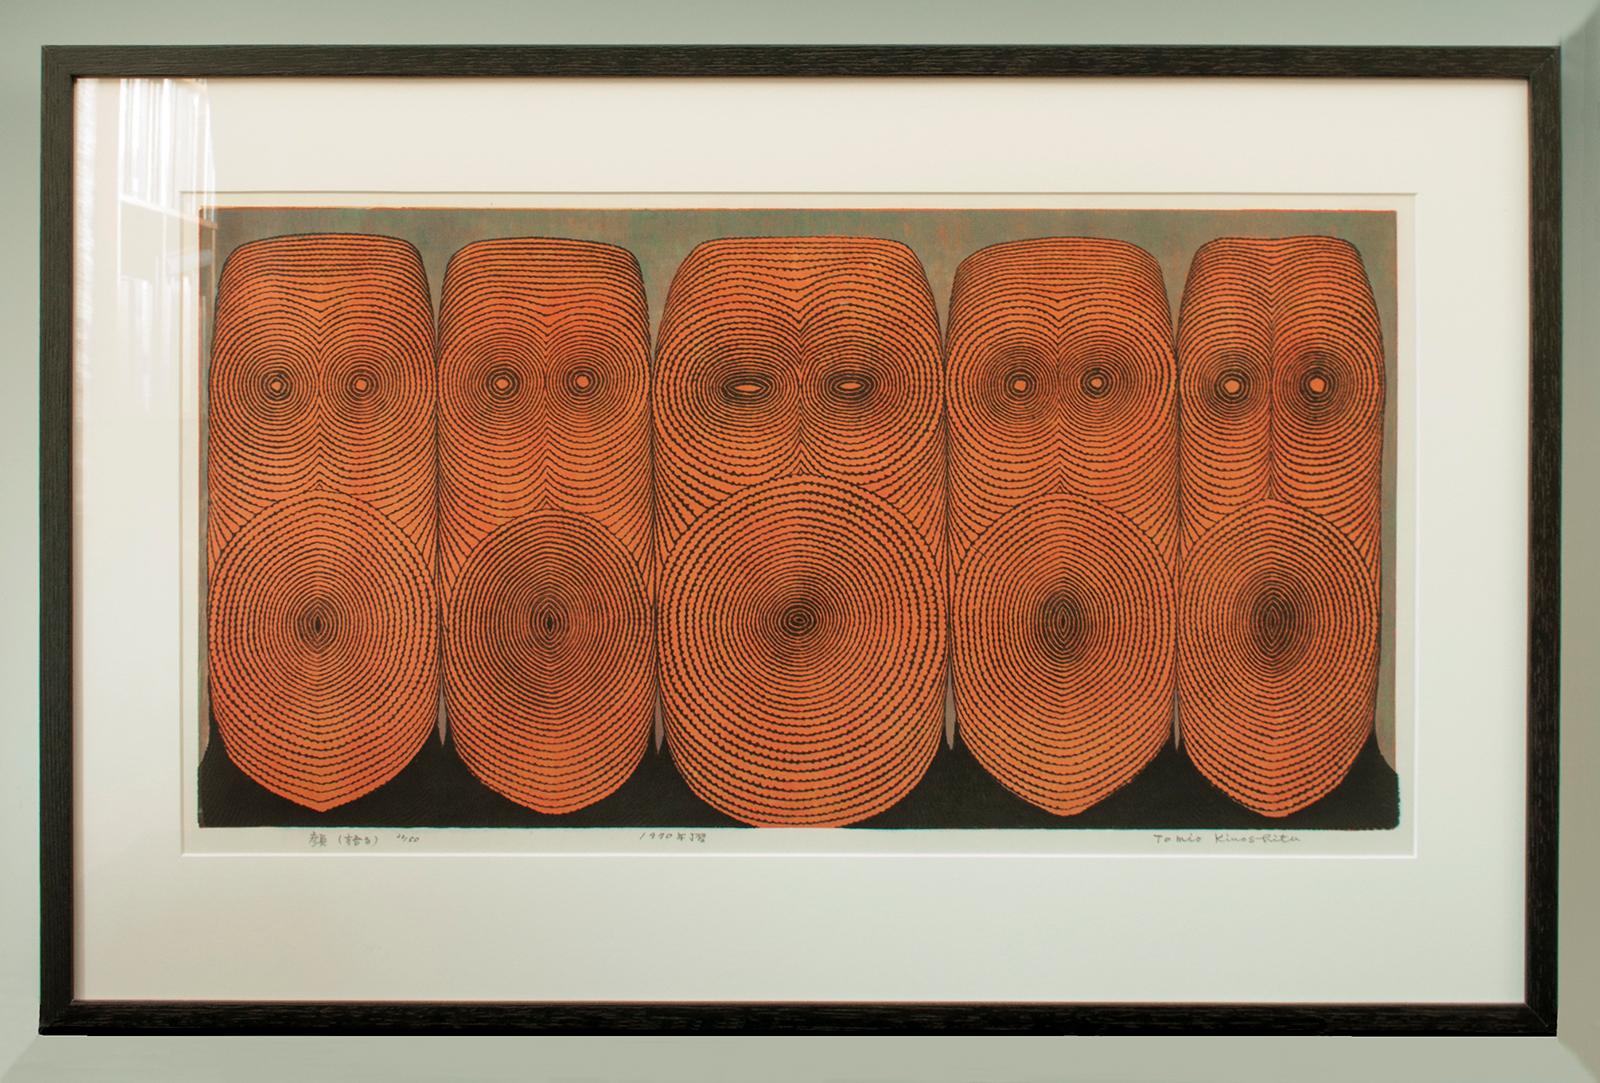 Paper 1970 Graphic Woodblock Print of Five Faces by Tomio Kinoshita, Japan